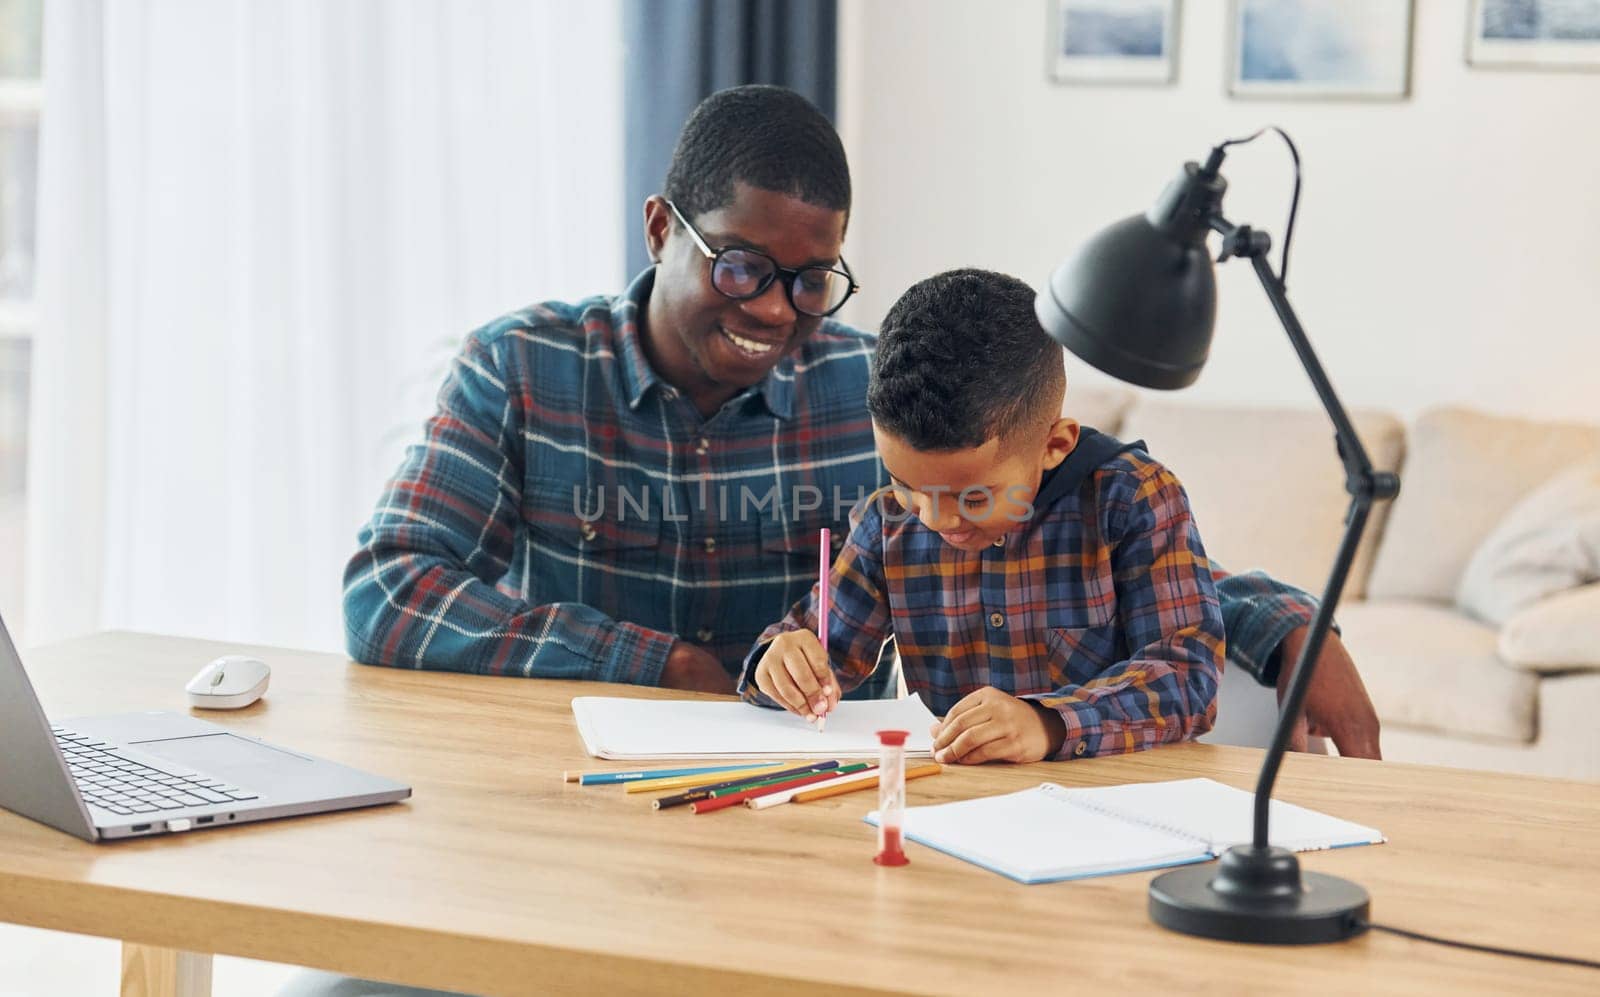 Drawing lessons. African american father with his young son at home by Standret